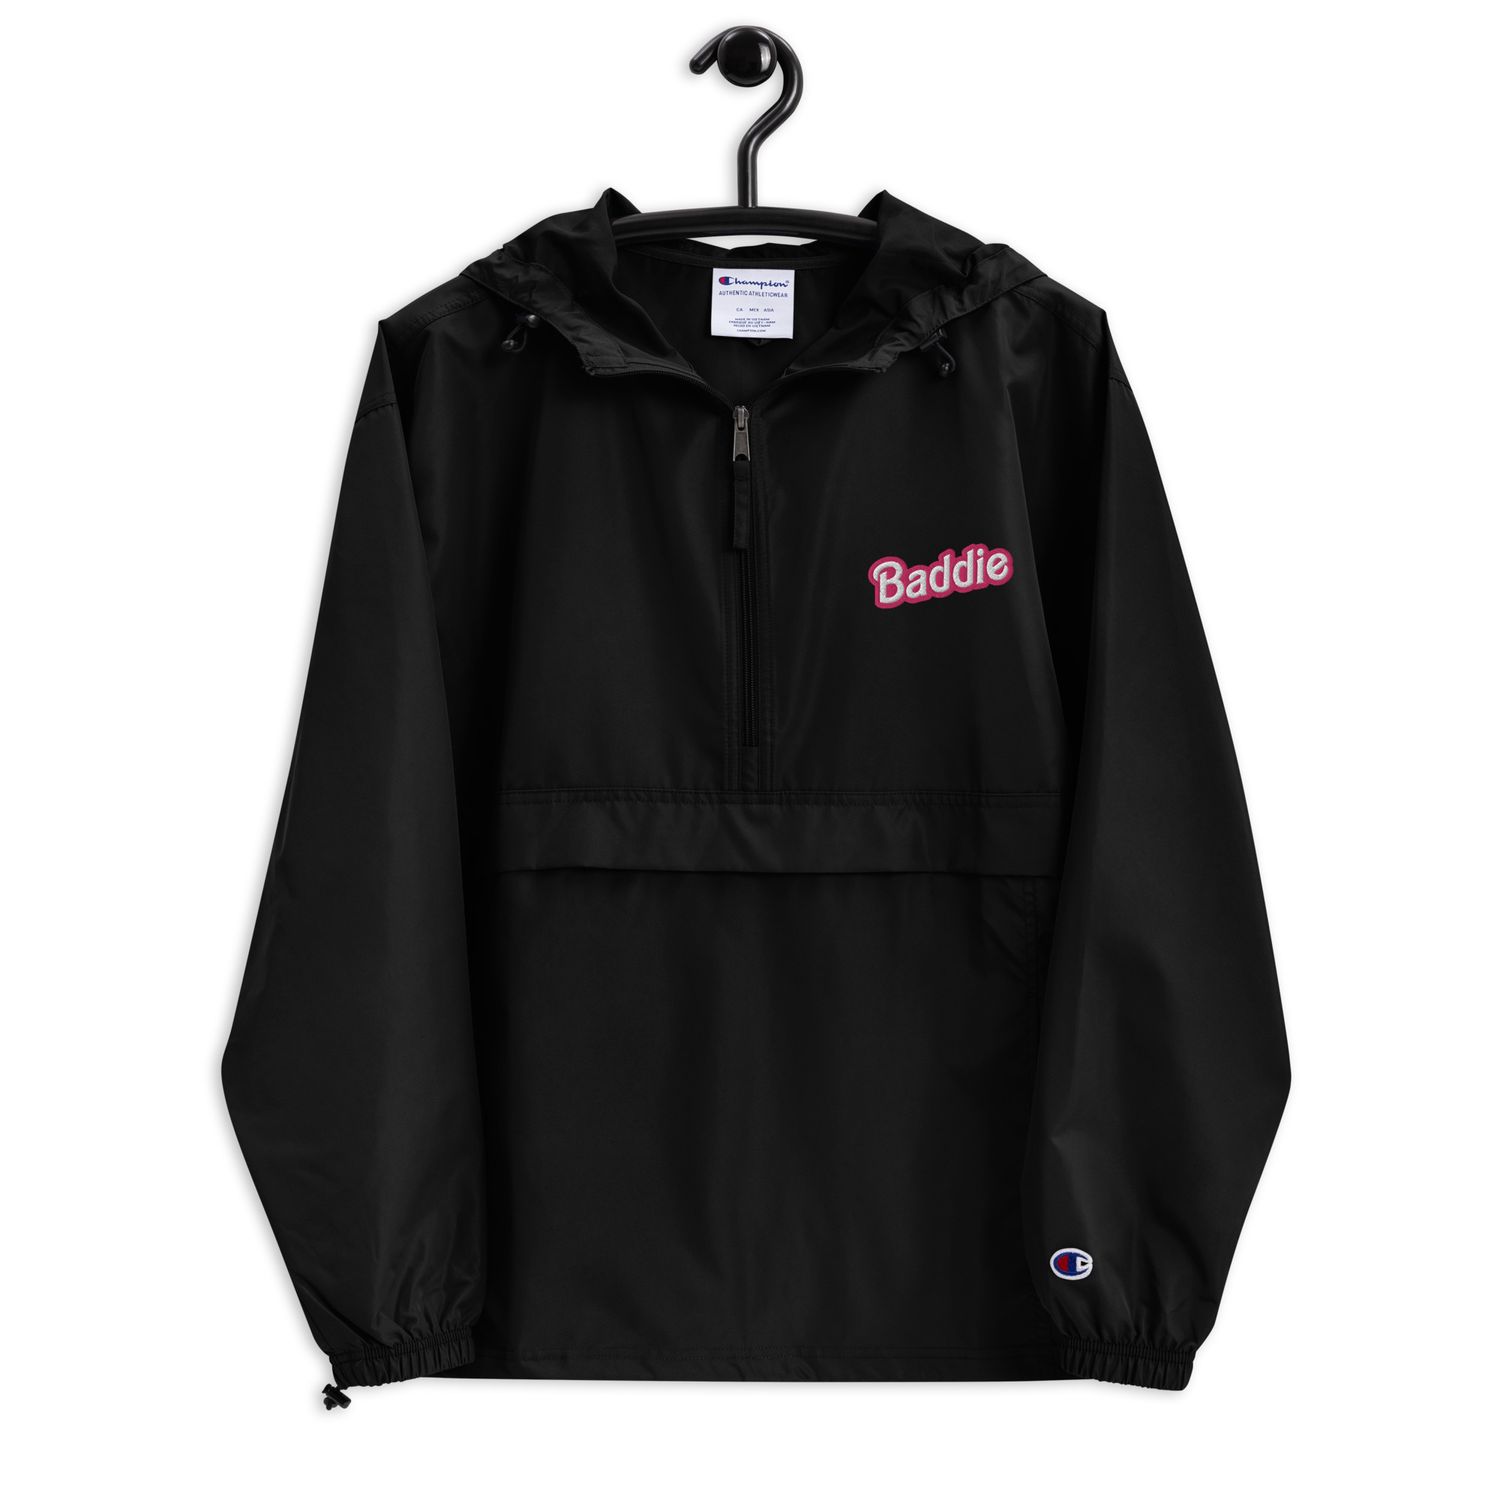  Baddie Embroidered Champion Packable Jacket